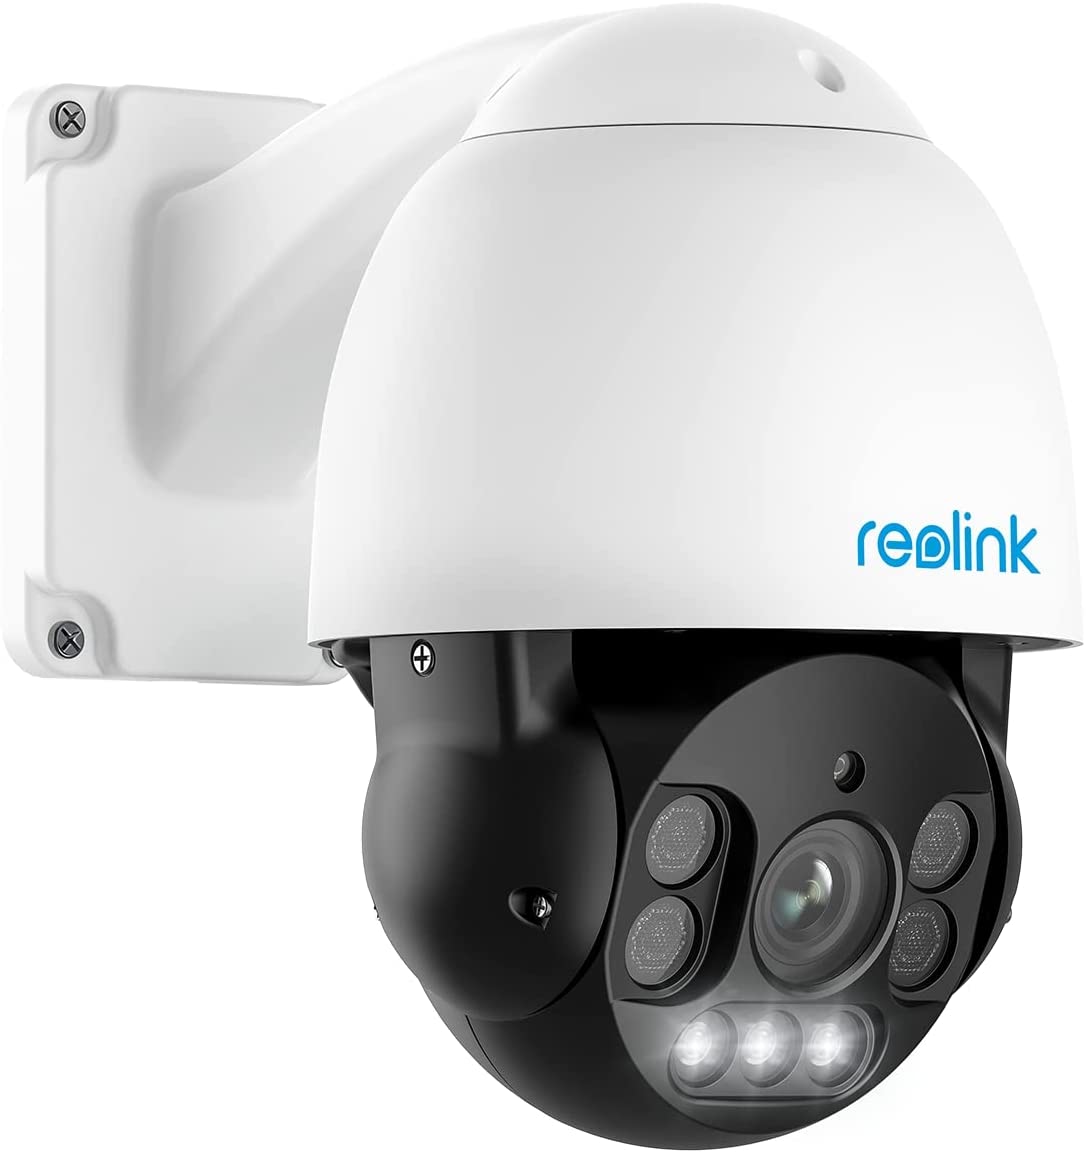 Reolink RLC-823A 8MP PoE IP Security Camera w/ Spotlights for $199.99 Prime Members Only